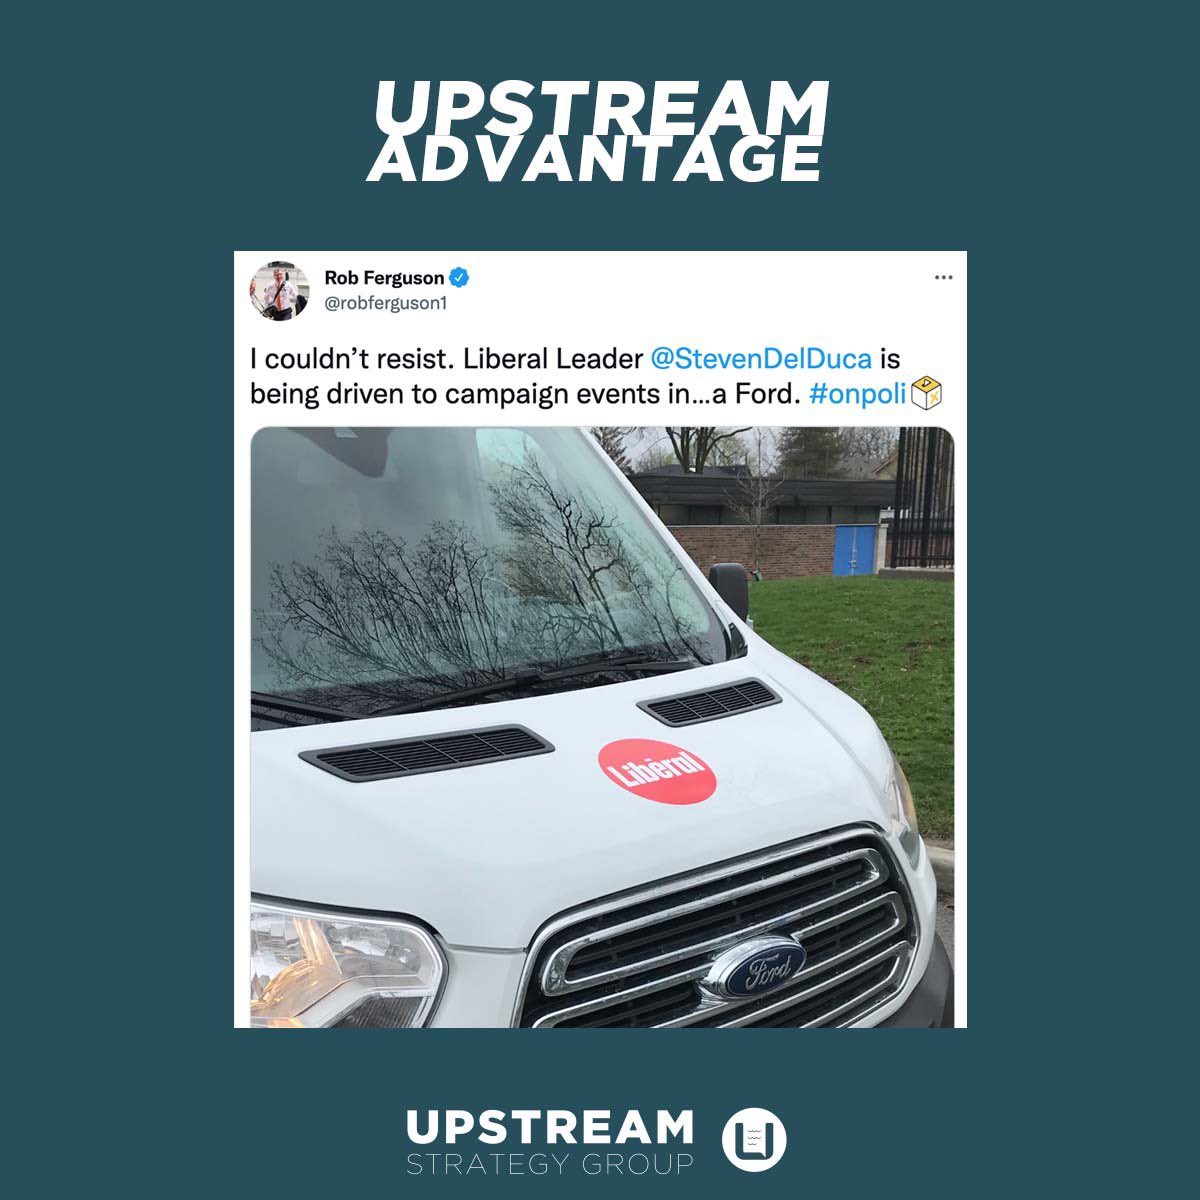 The most coveted and sought after recognition in #OnElxn beyond winning the election itself? The @upstream_group Tweet-of-the-Day™️. Yesterday's honour bestowed upon @robferguson1. Sign up for our daily brief: upstreamgroup.ca/upstream-update